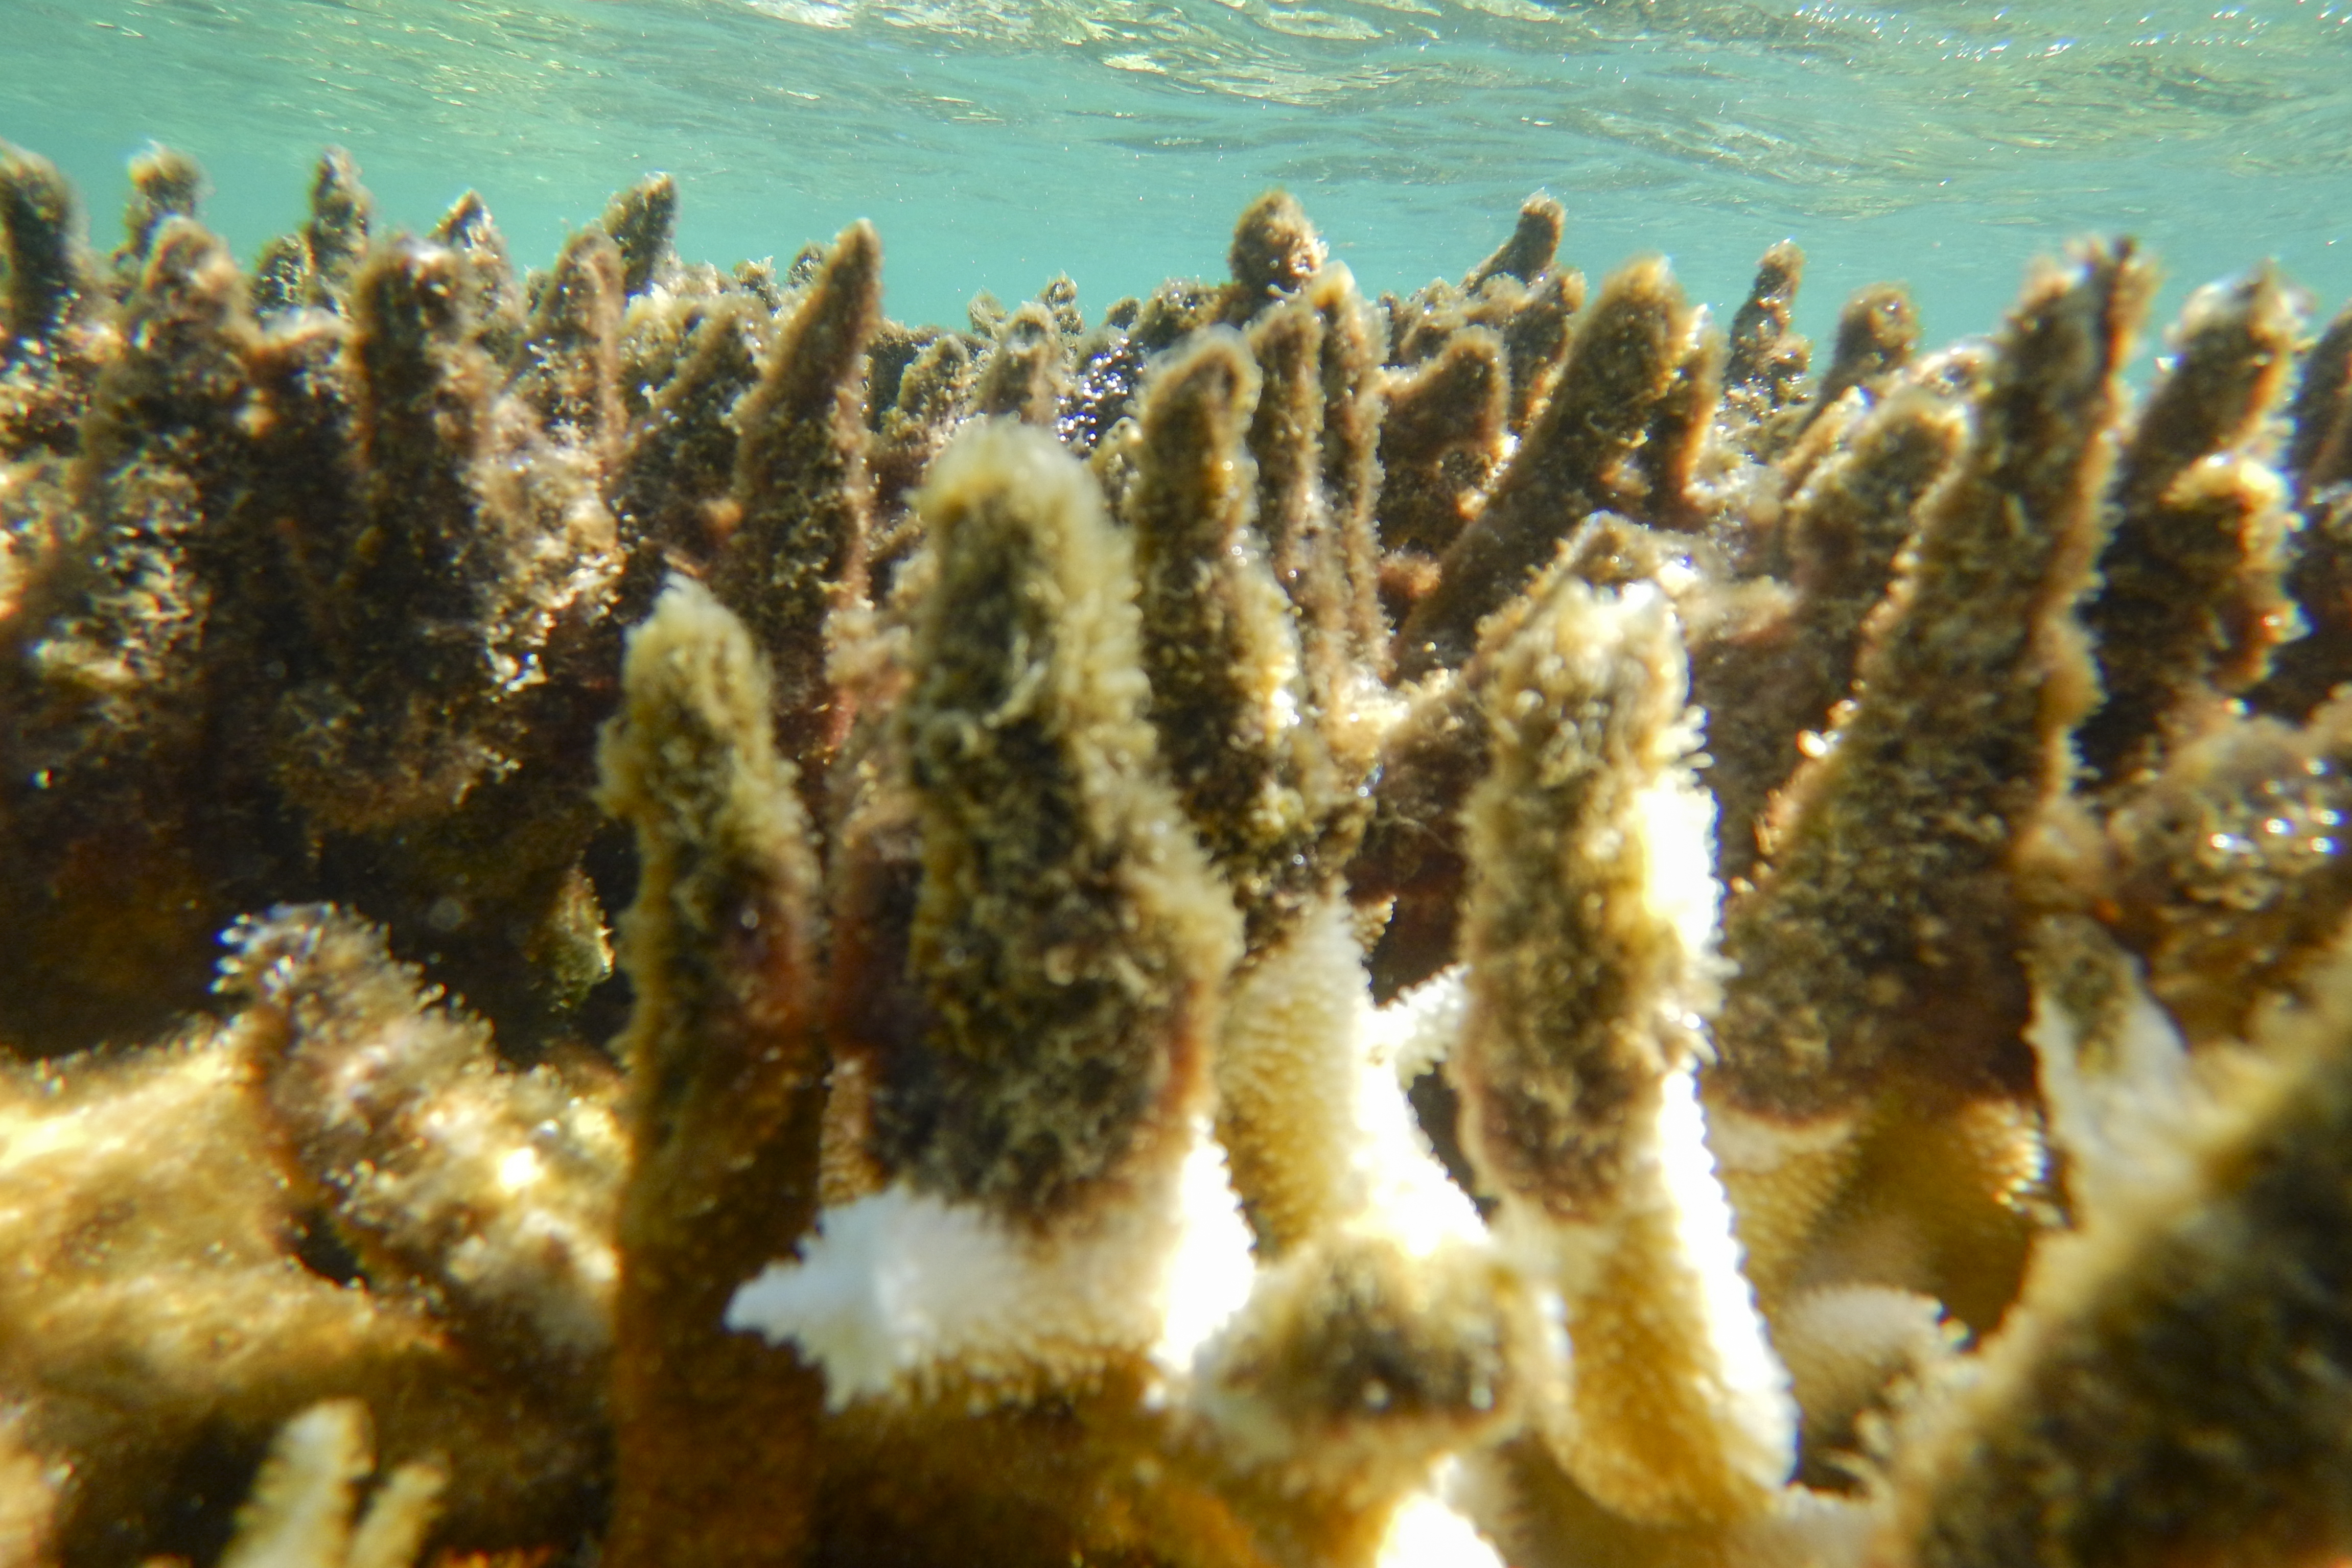 Diseased corals at a reef in the Cairns/Cooktown on the Great Barrier Reef in Australia